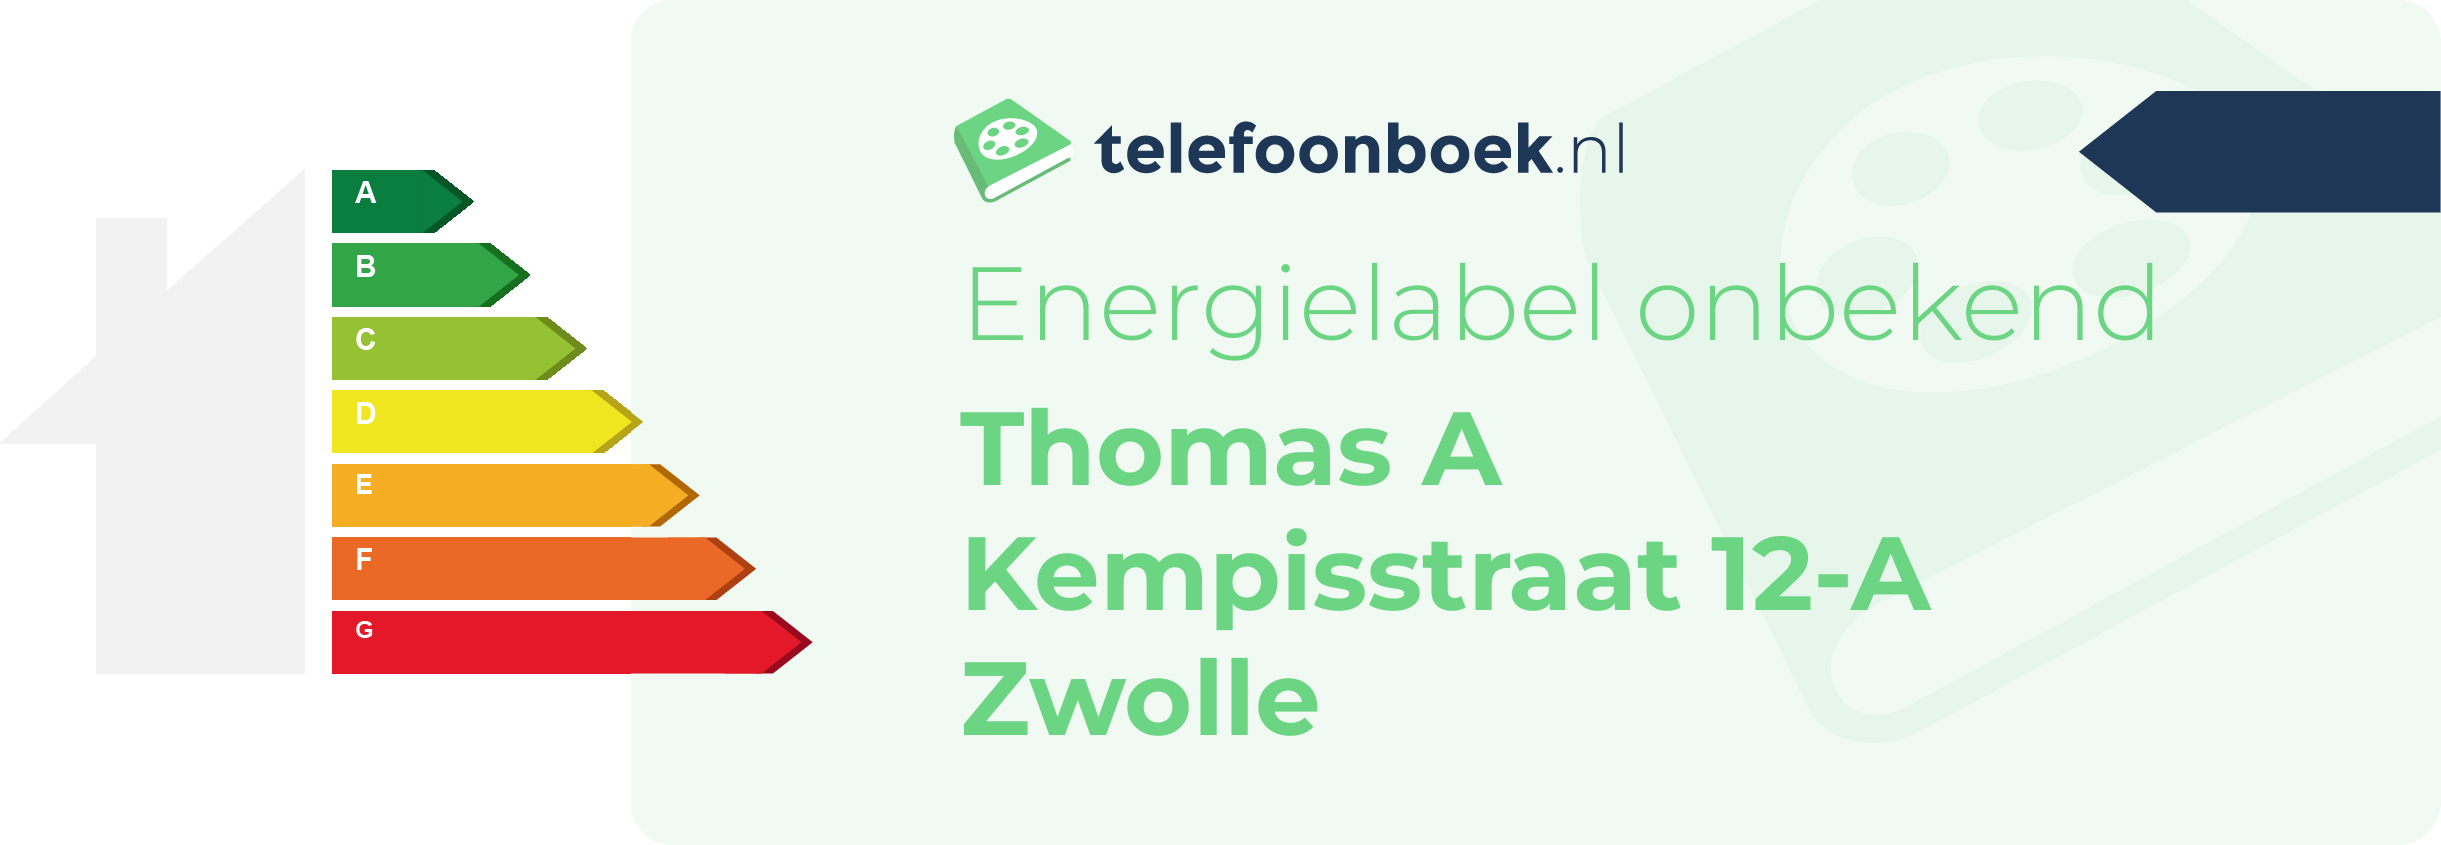 Energielabel Thomas A Kempisstraat 12-A Zwolle